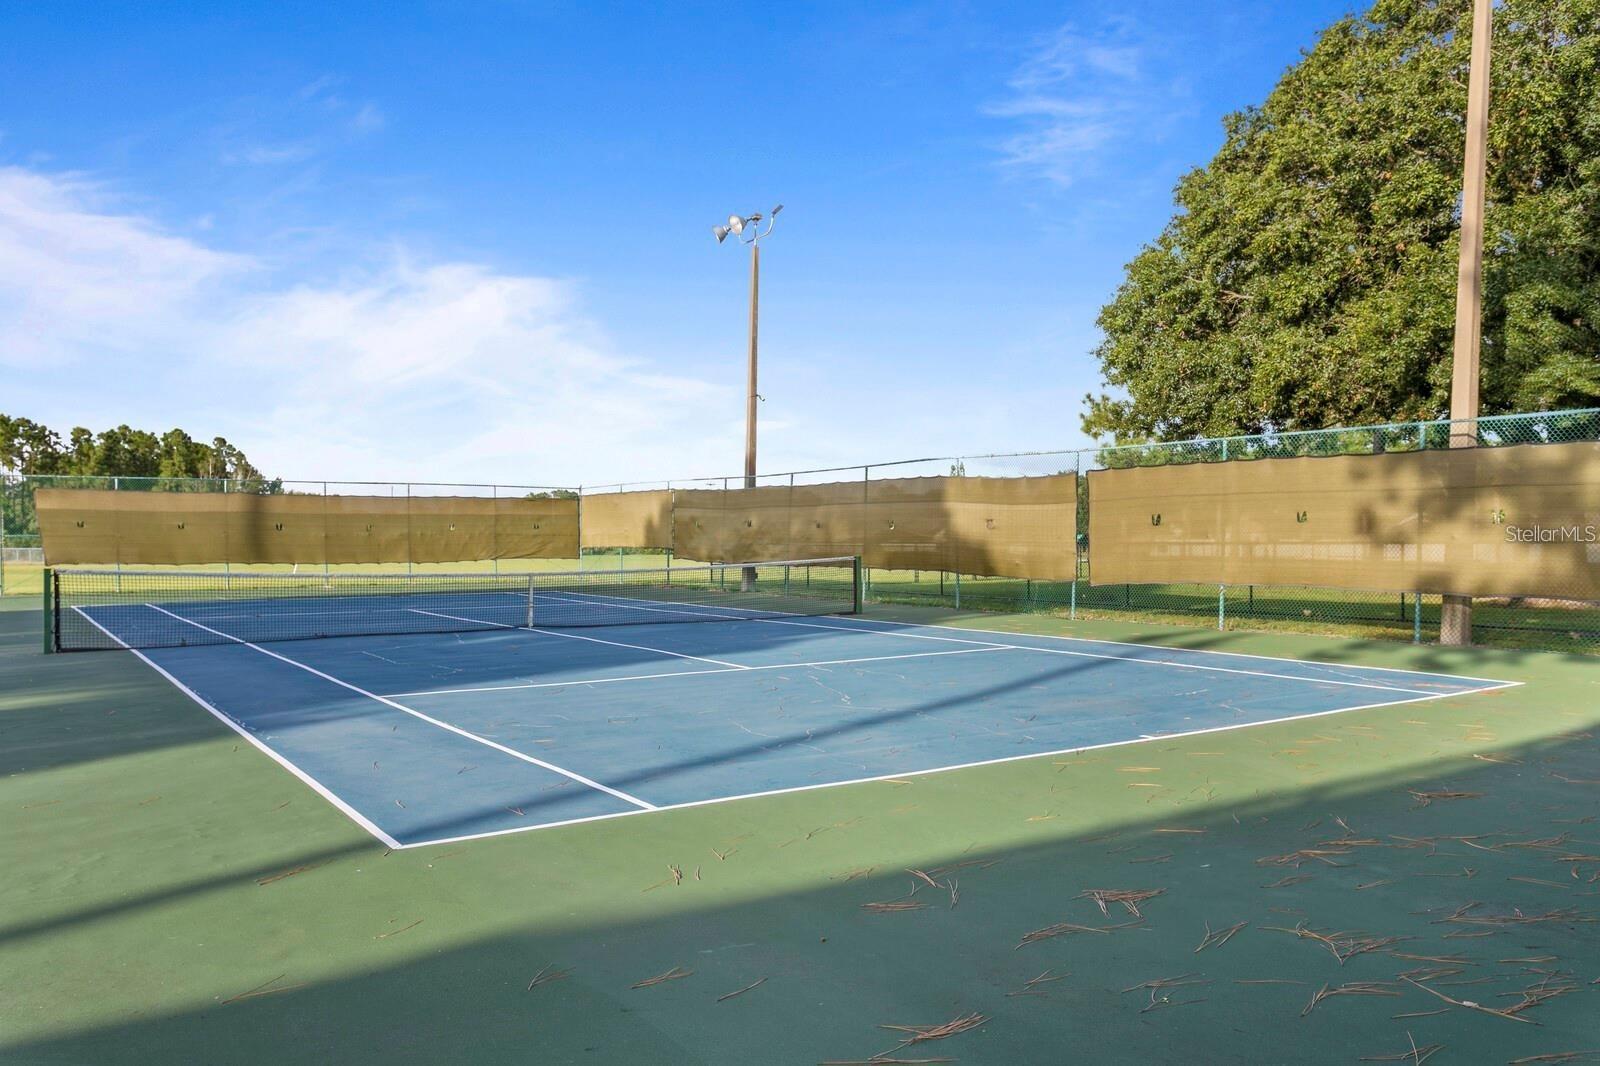 Tennis Courts at Summerfield Crossings Community Center